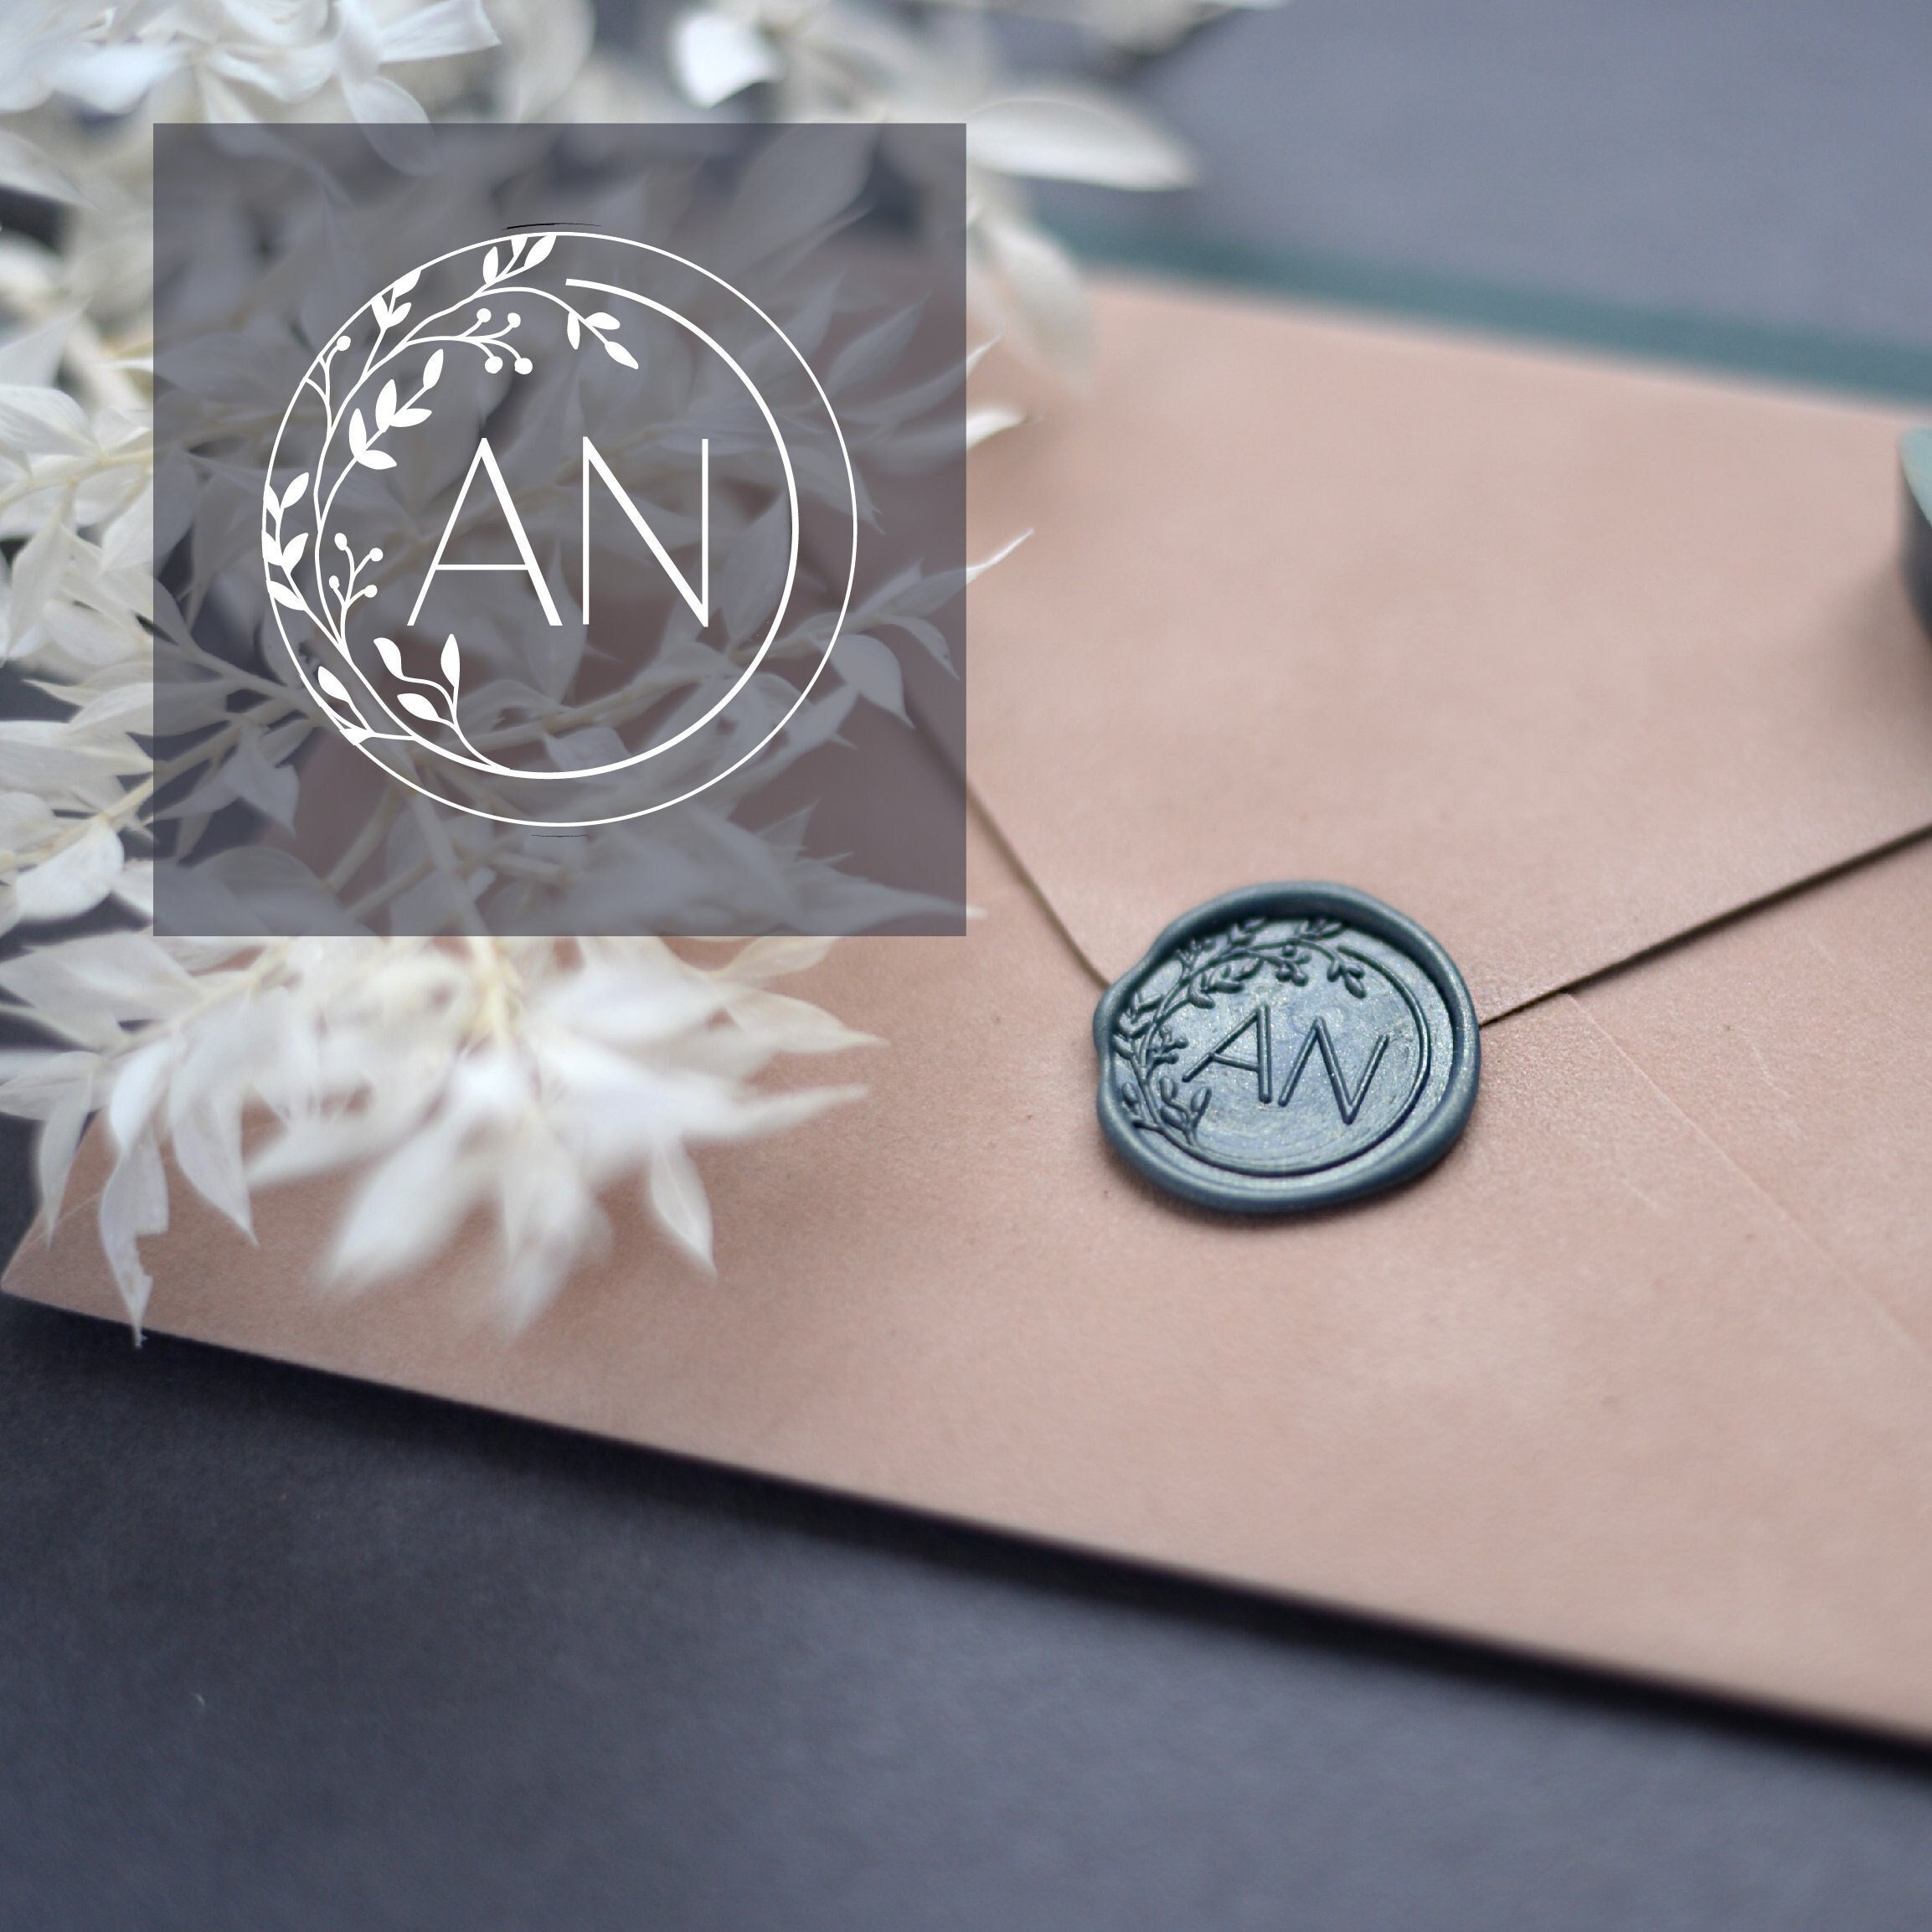 Custom Wax Seal Stamp Personalized Logo Sealing Wax Stamp Letter